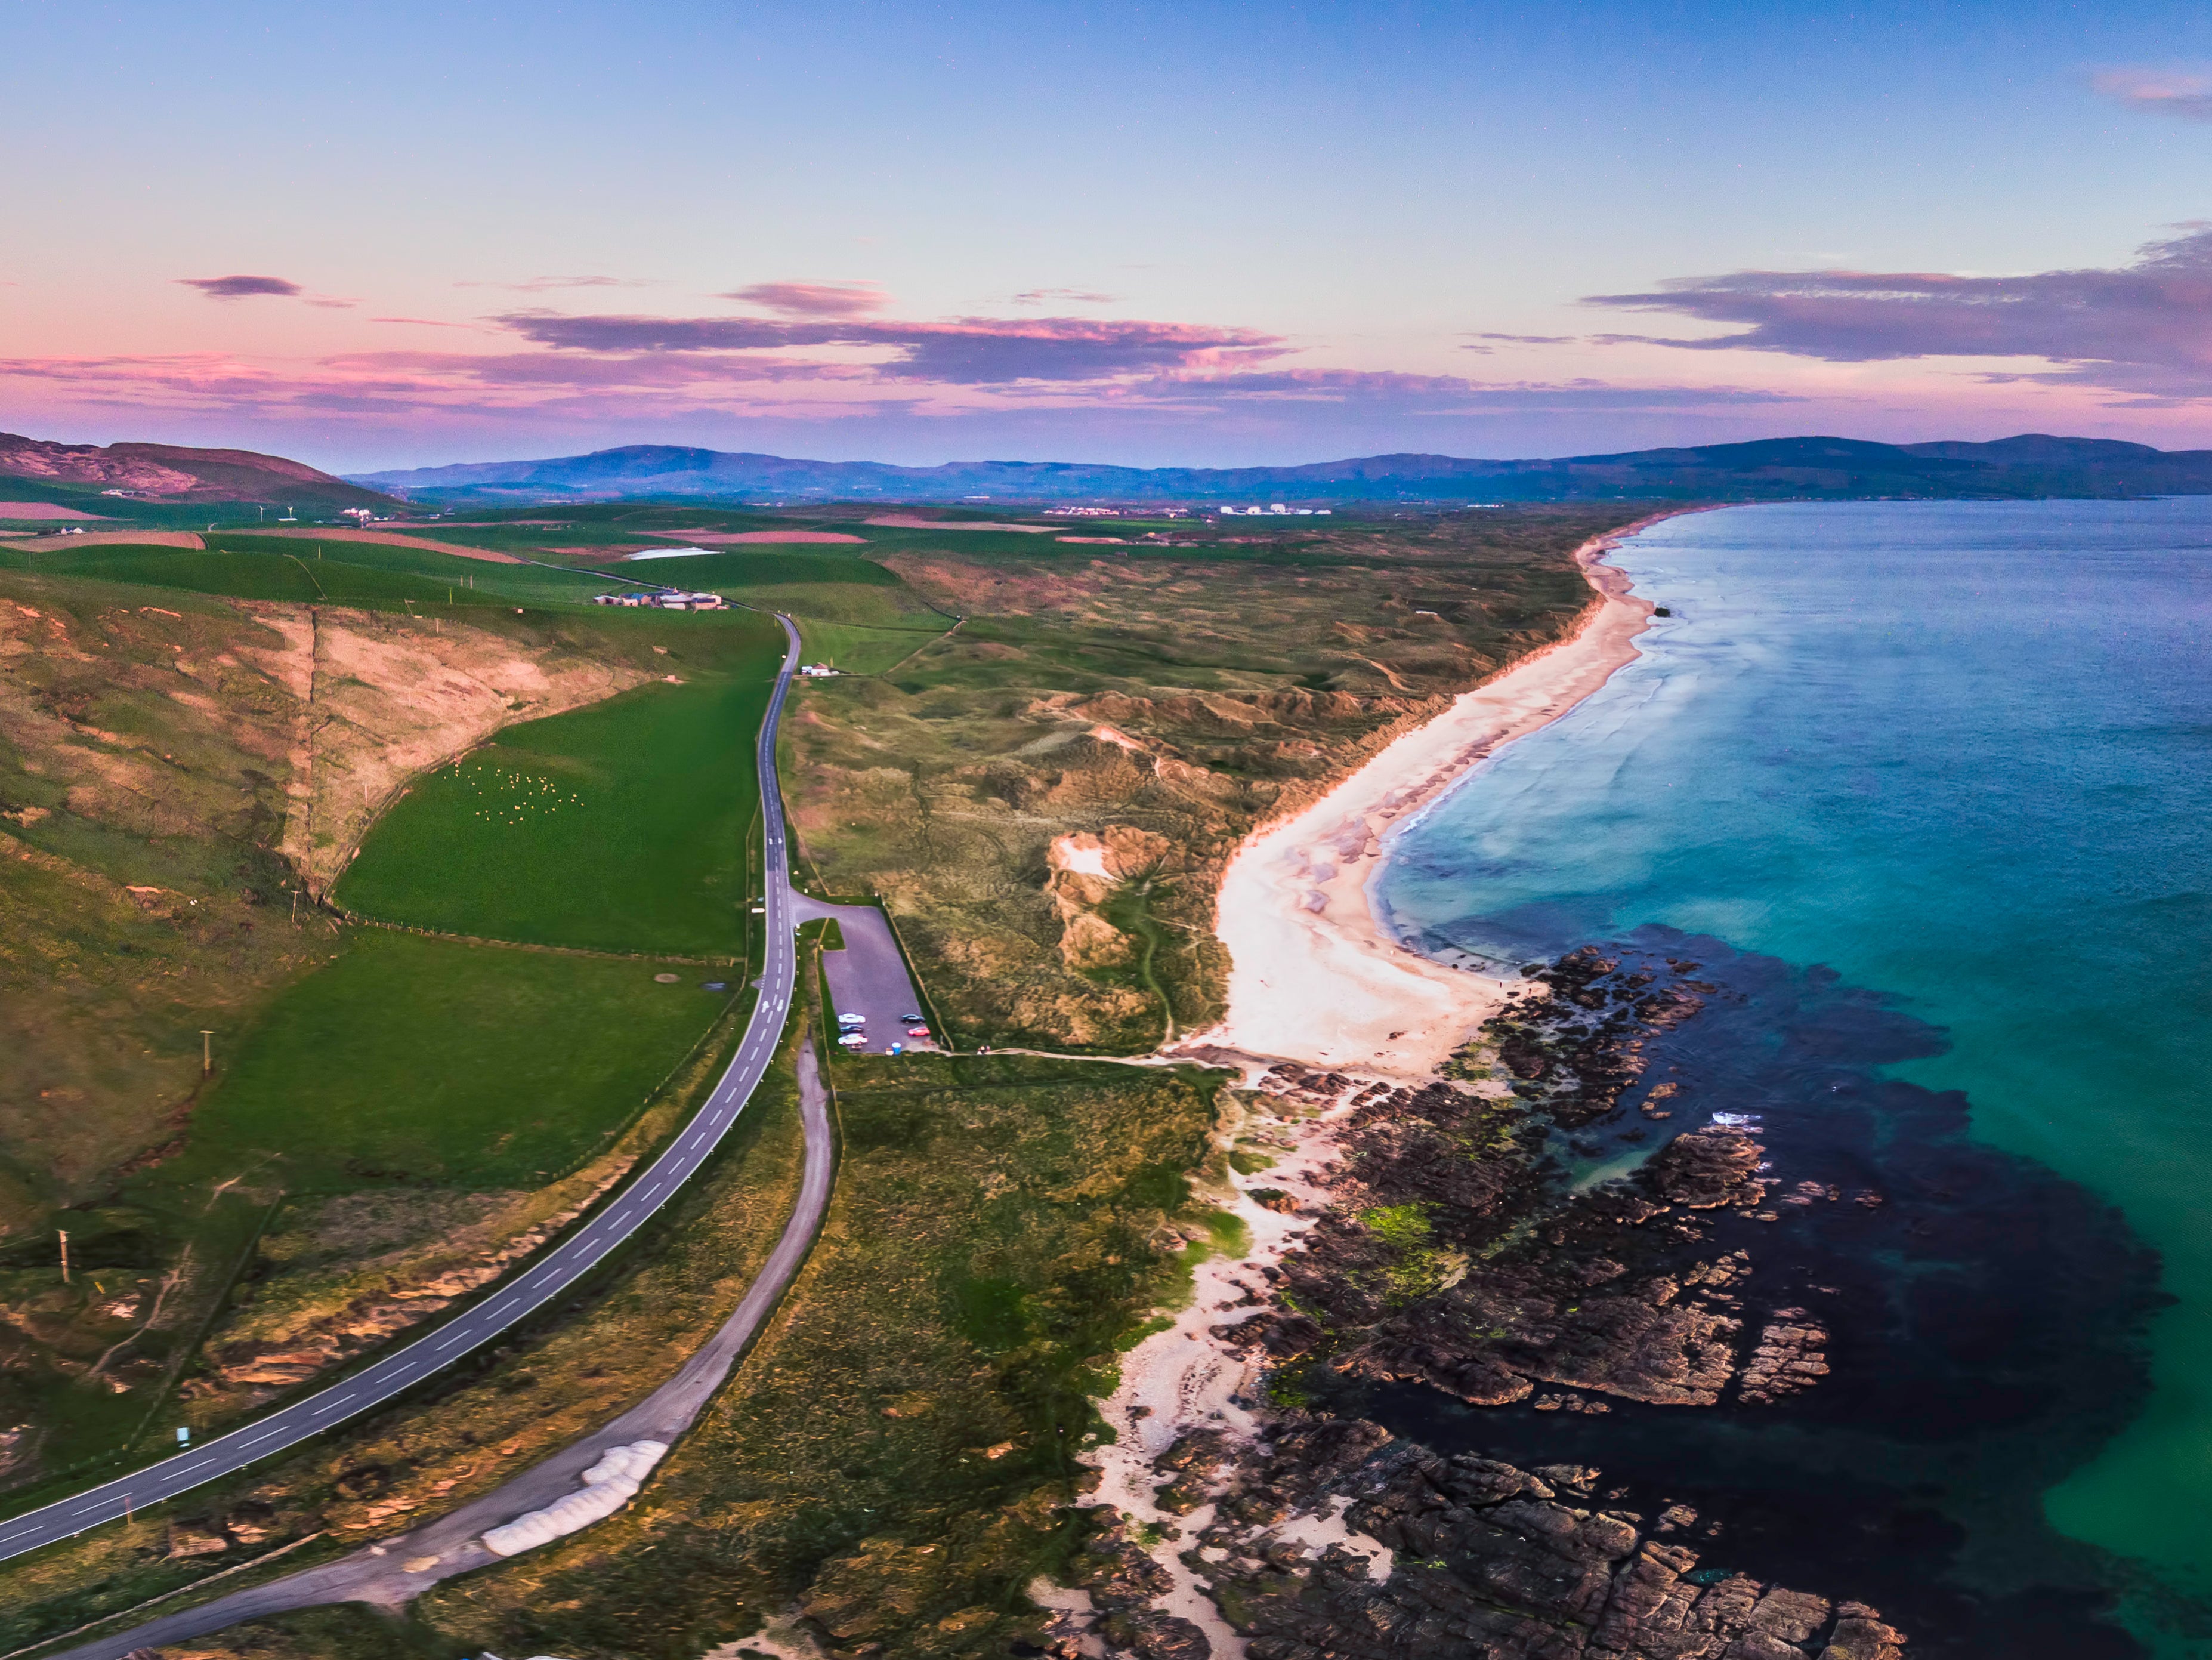 Kintyre 66 offers travellers a rugged road trip